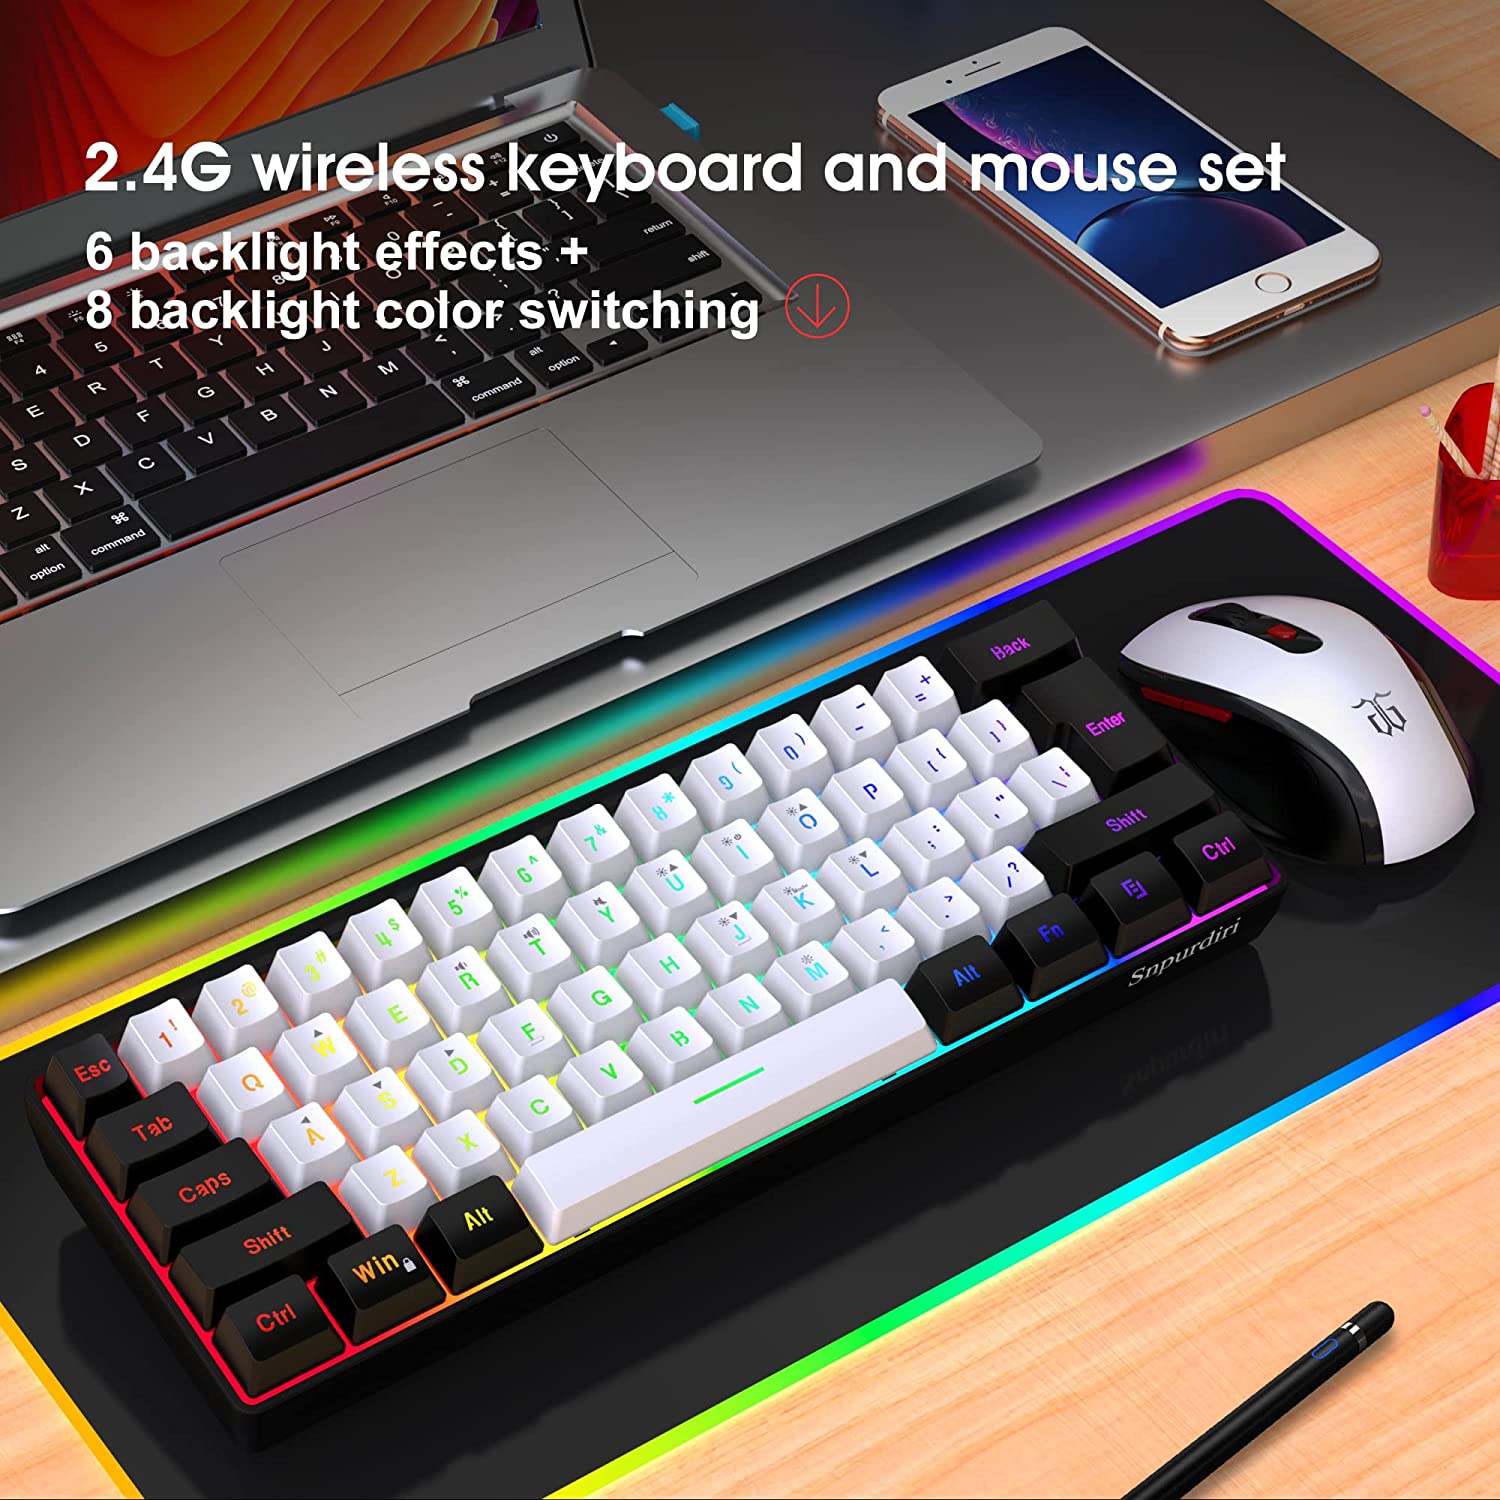 Snpurdiri 2.4G Wireless Gaming Keyboard and Mouse Combo, Black-White